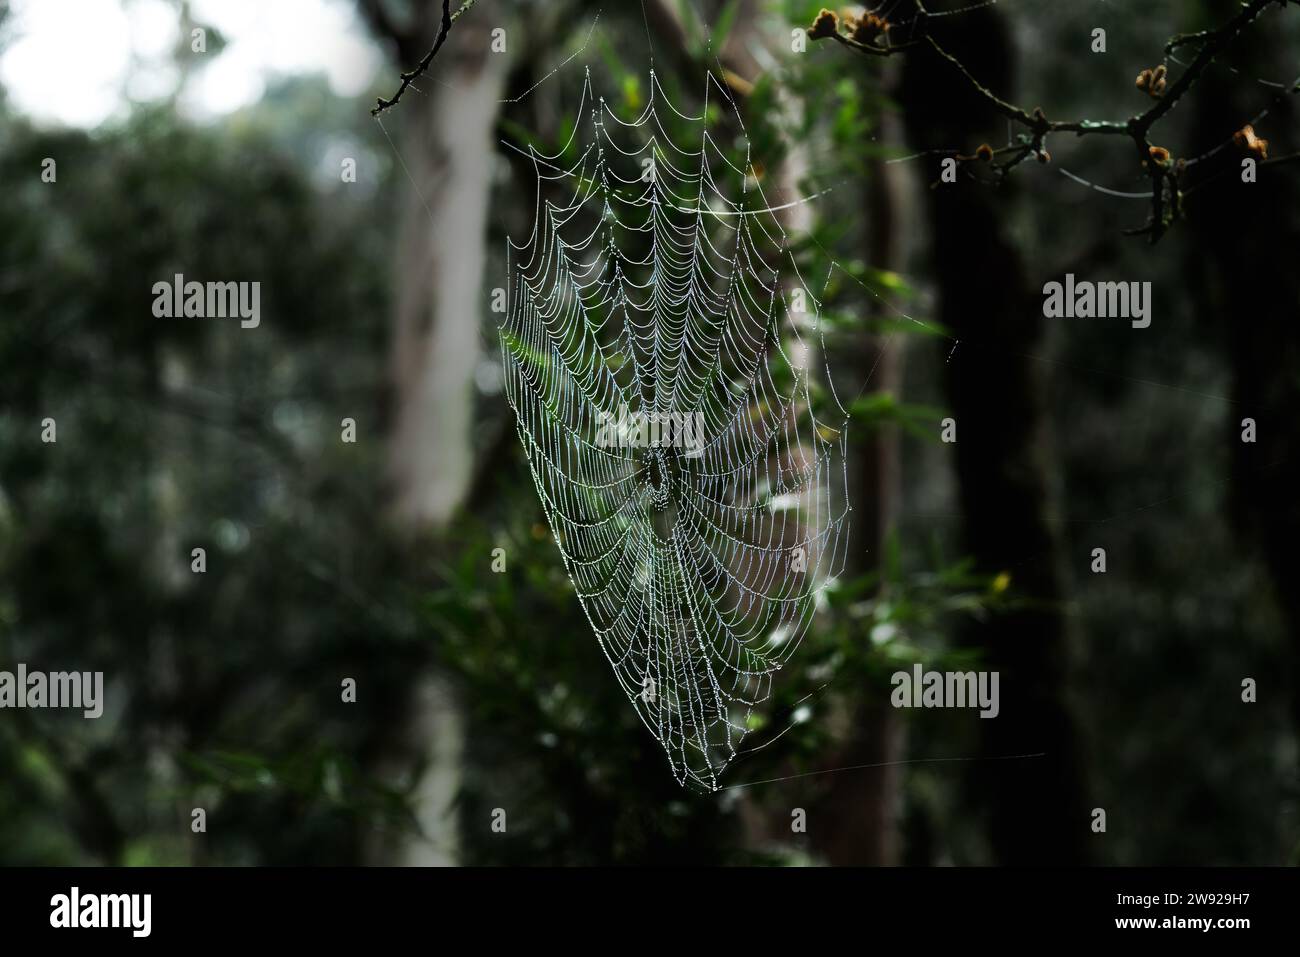 Spider Web covered in water droplets Stock Photo